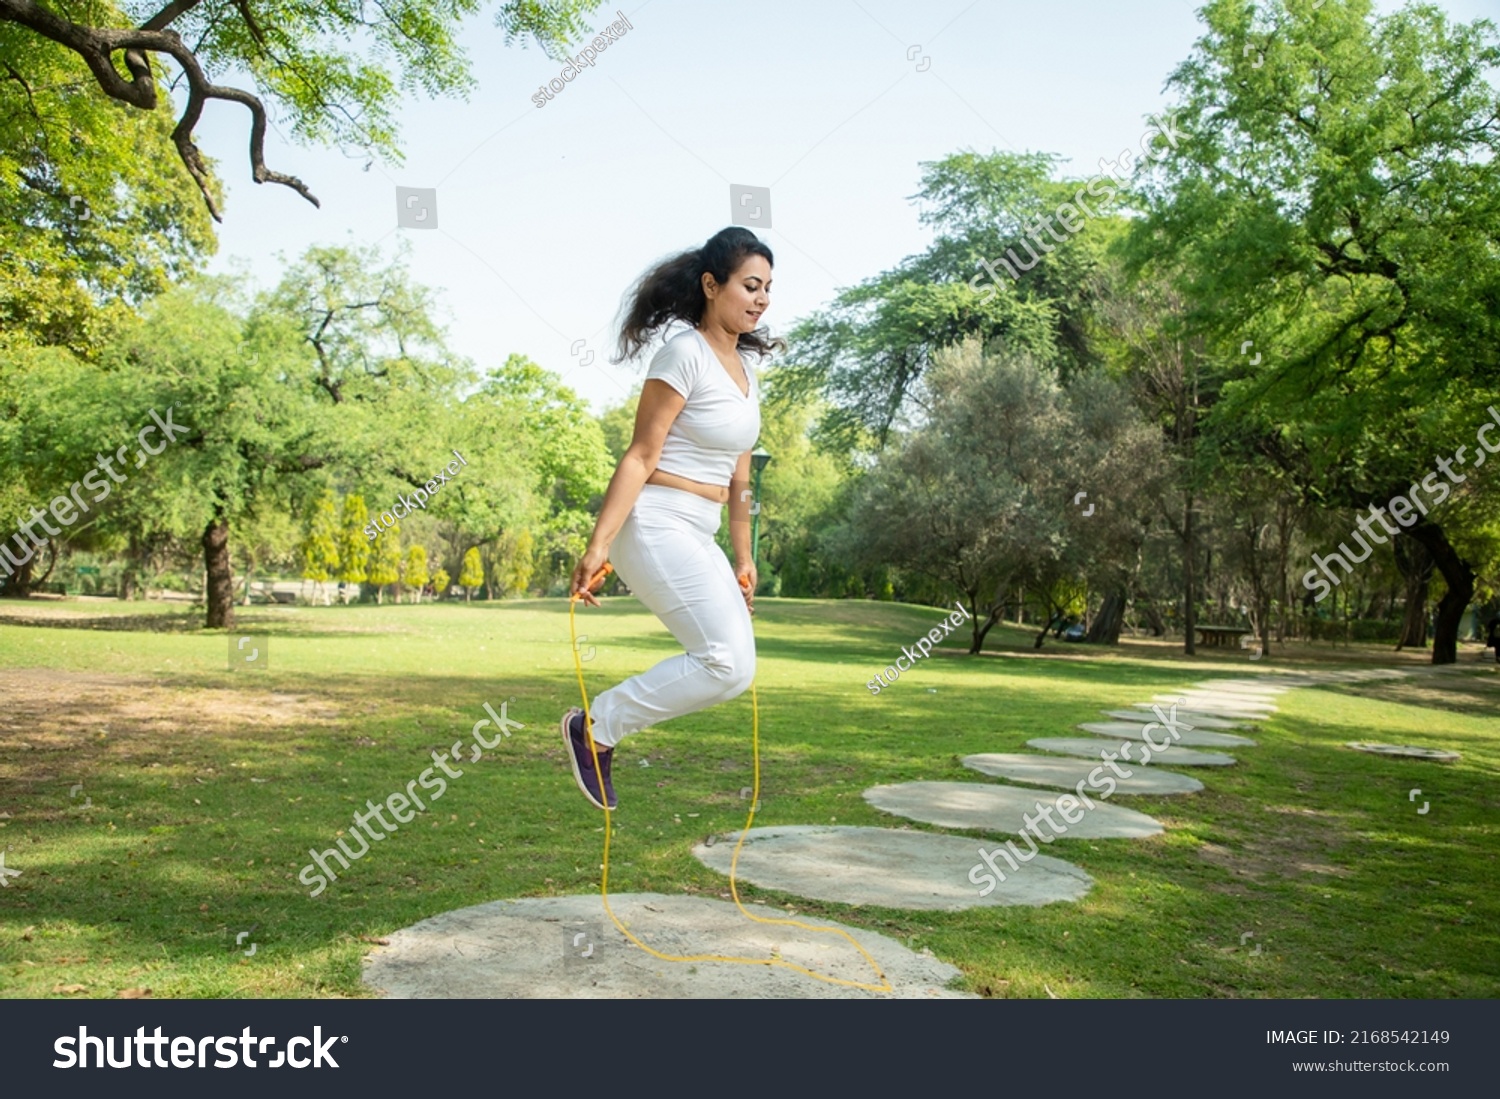 Young Indian Fitness Woman Wearing White Stock Photo 2168542149 ...